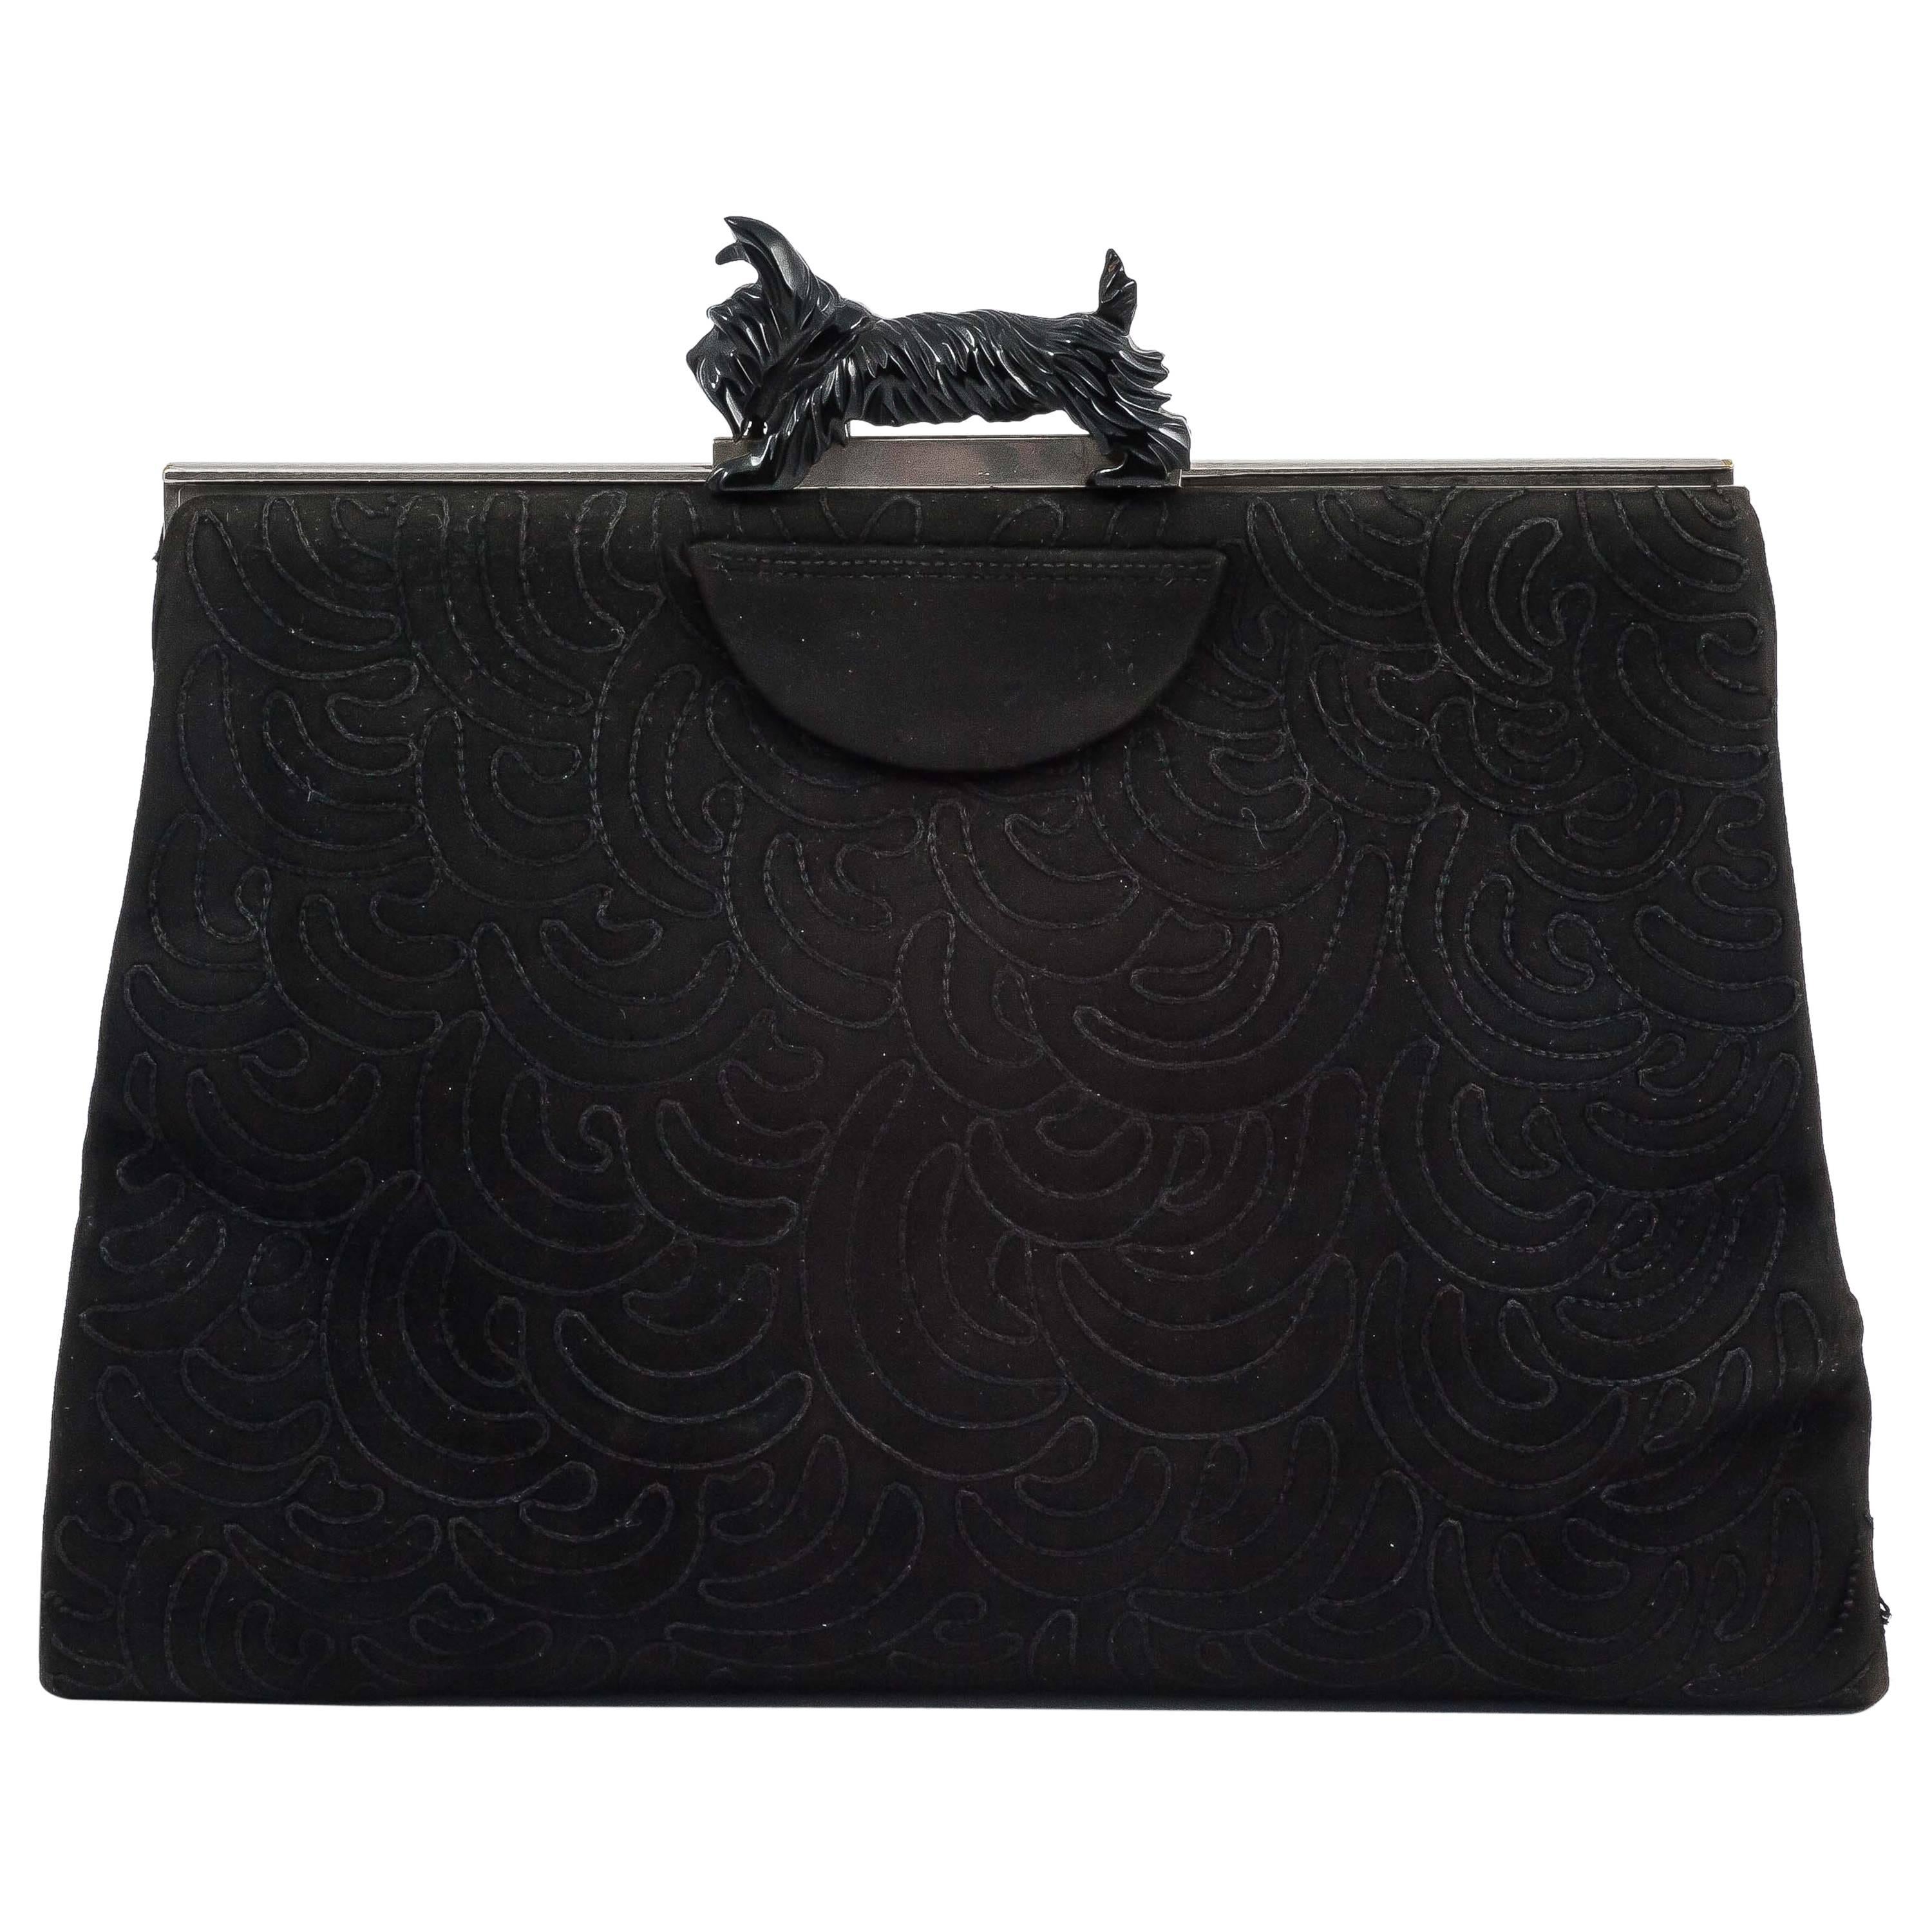 Black stitched suede and chrome clutch with bakelite 'Scottie Dog' clasp, 1930s